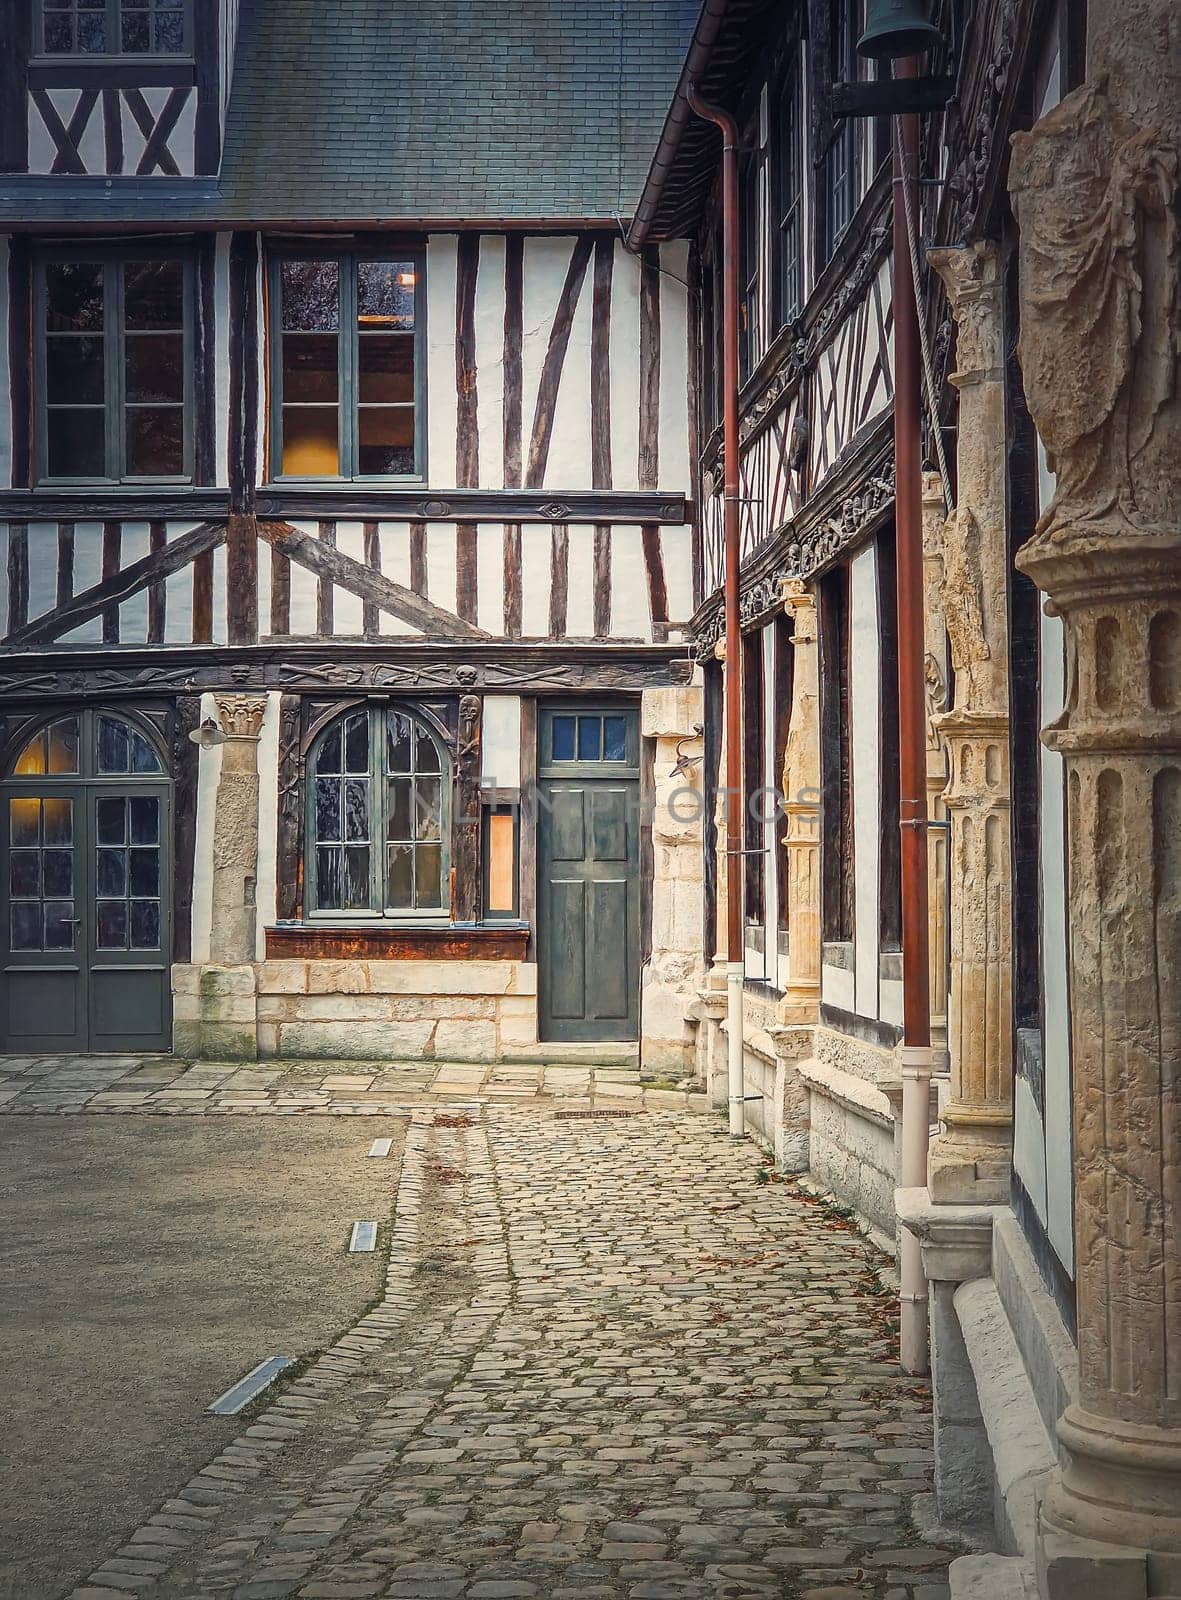 Saint-Maclou aitre, aster courtyard of medieval cemetery. Fachwerk architecture, half timbered facades details of the buildings located in Rouen, Normandy, France